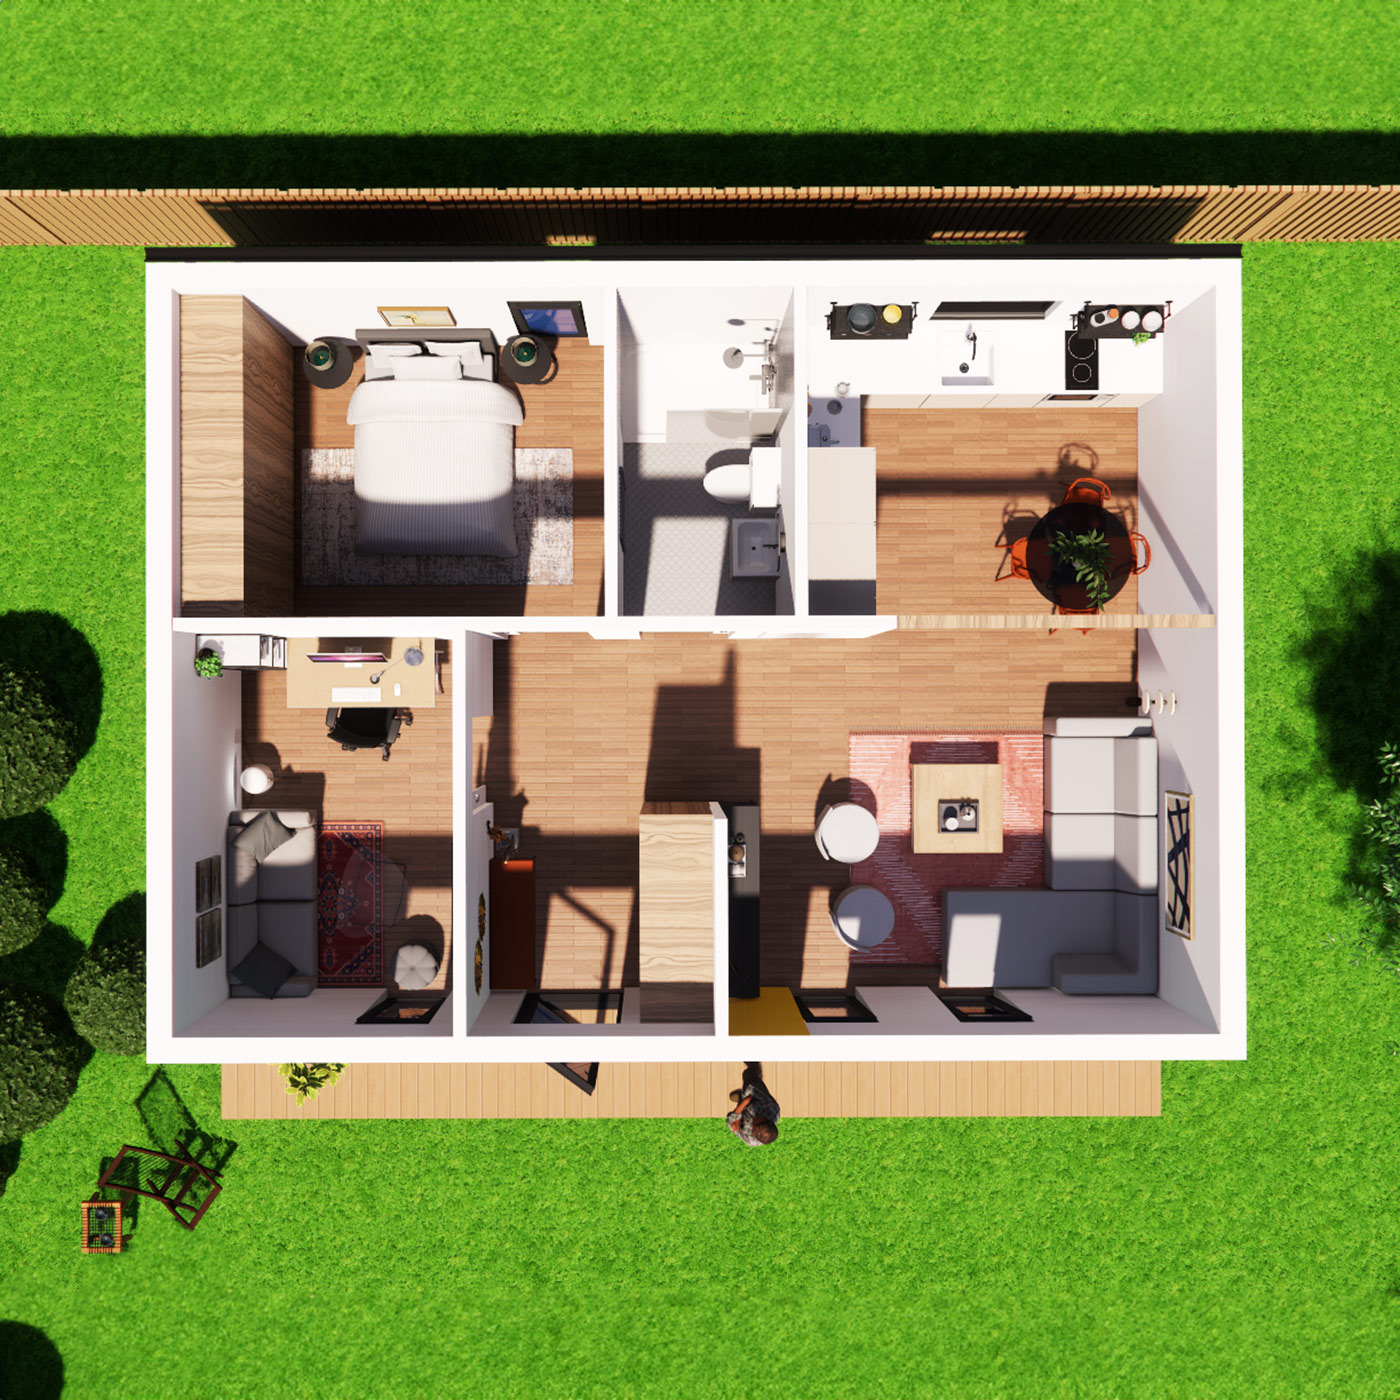 Visualisation of mobile home floorplan with interior design 6.2m by 8.6m